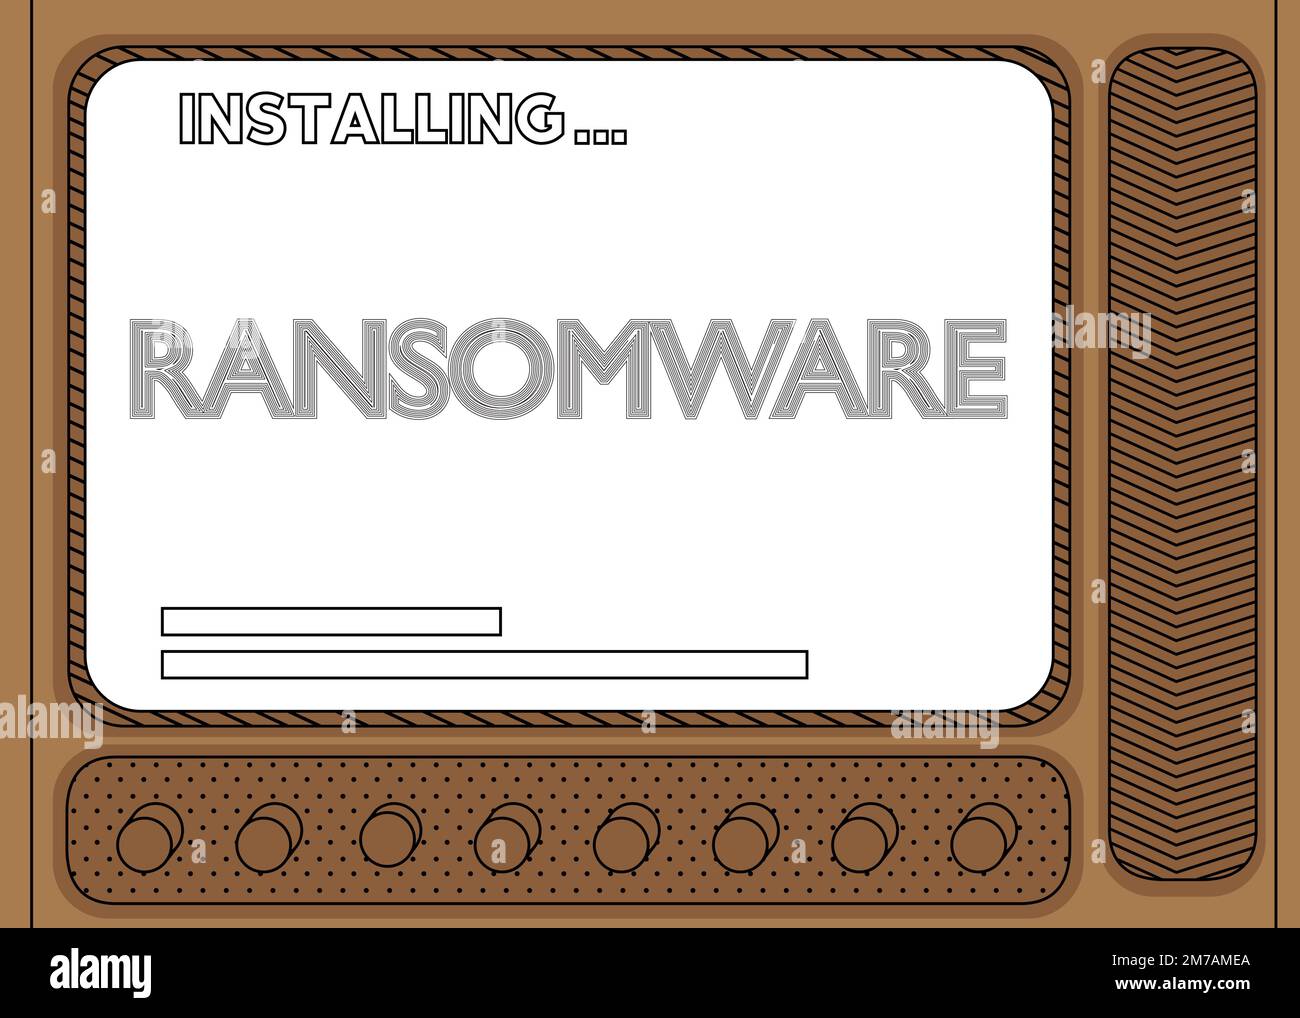 Cartoon Computer With the word Ransomware. Message of a screen displaying an installation window. Stock Vector